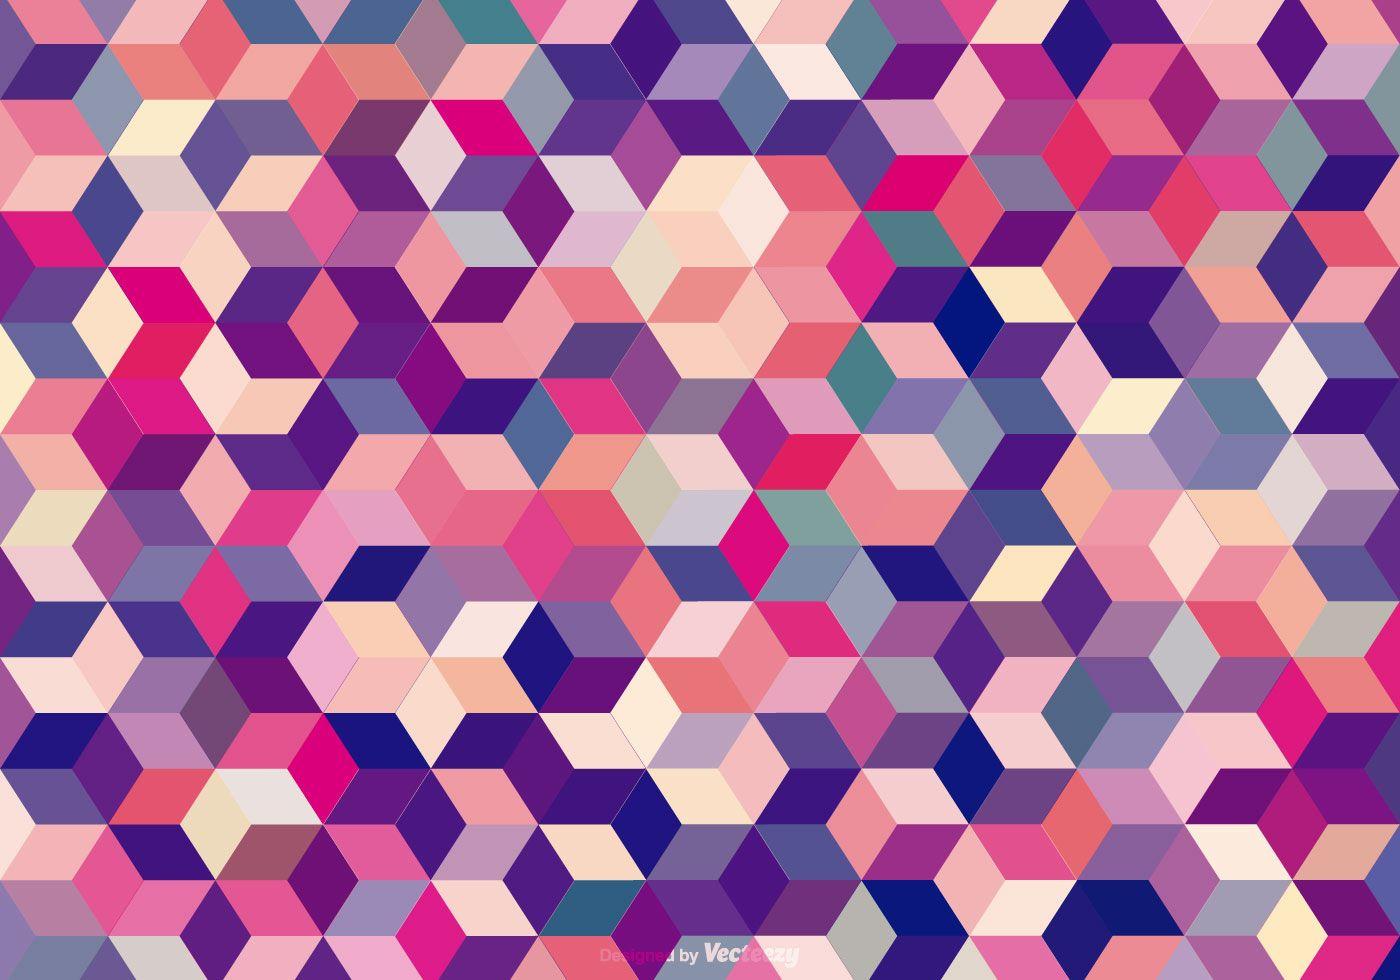 Abstract Colored Cubes Background Free Vector Art, Stock